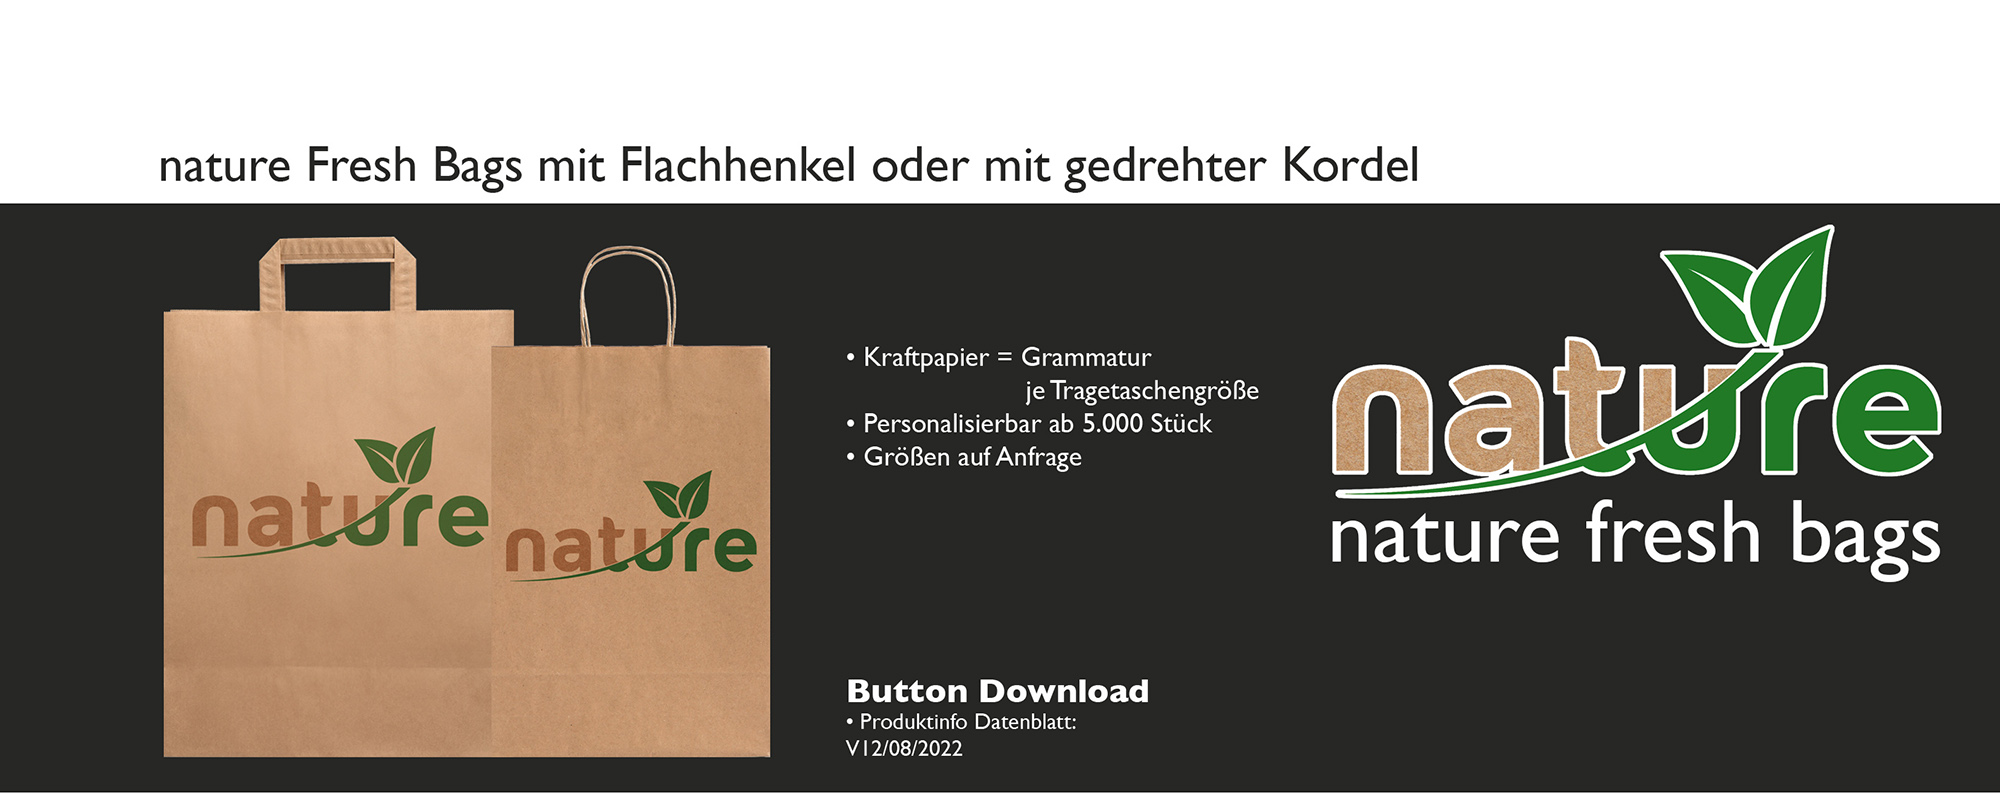 Austria Packaging Solution Doypacks nature fresh bags